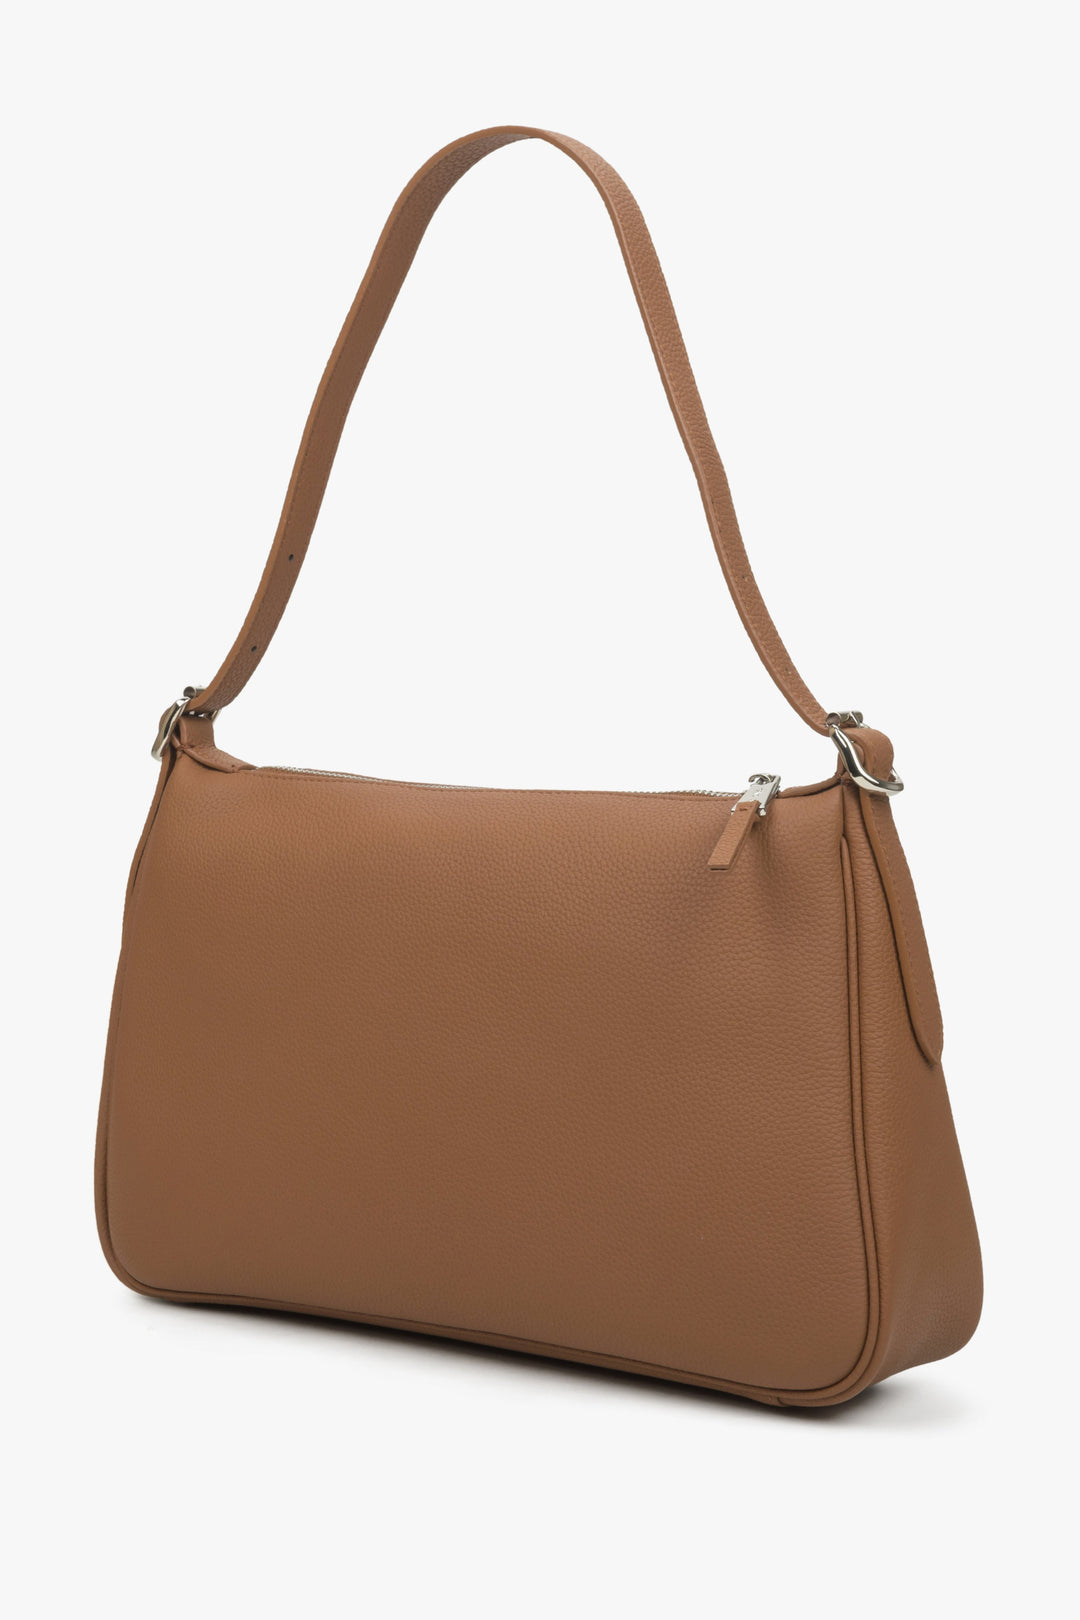 Women's shoulder bag made of genuine leather, brown colour.